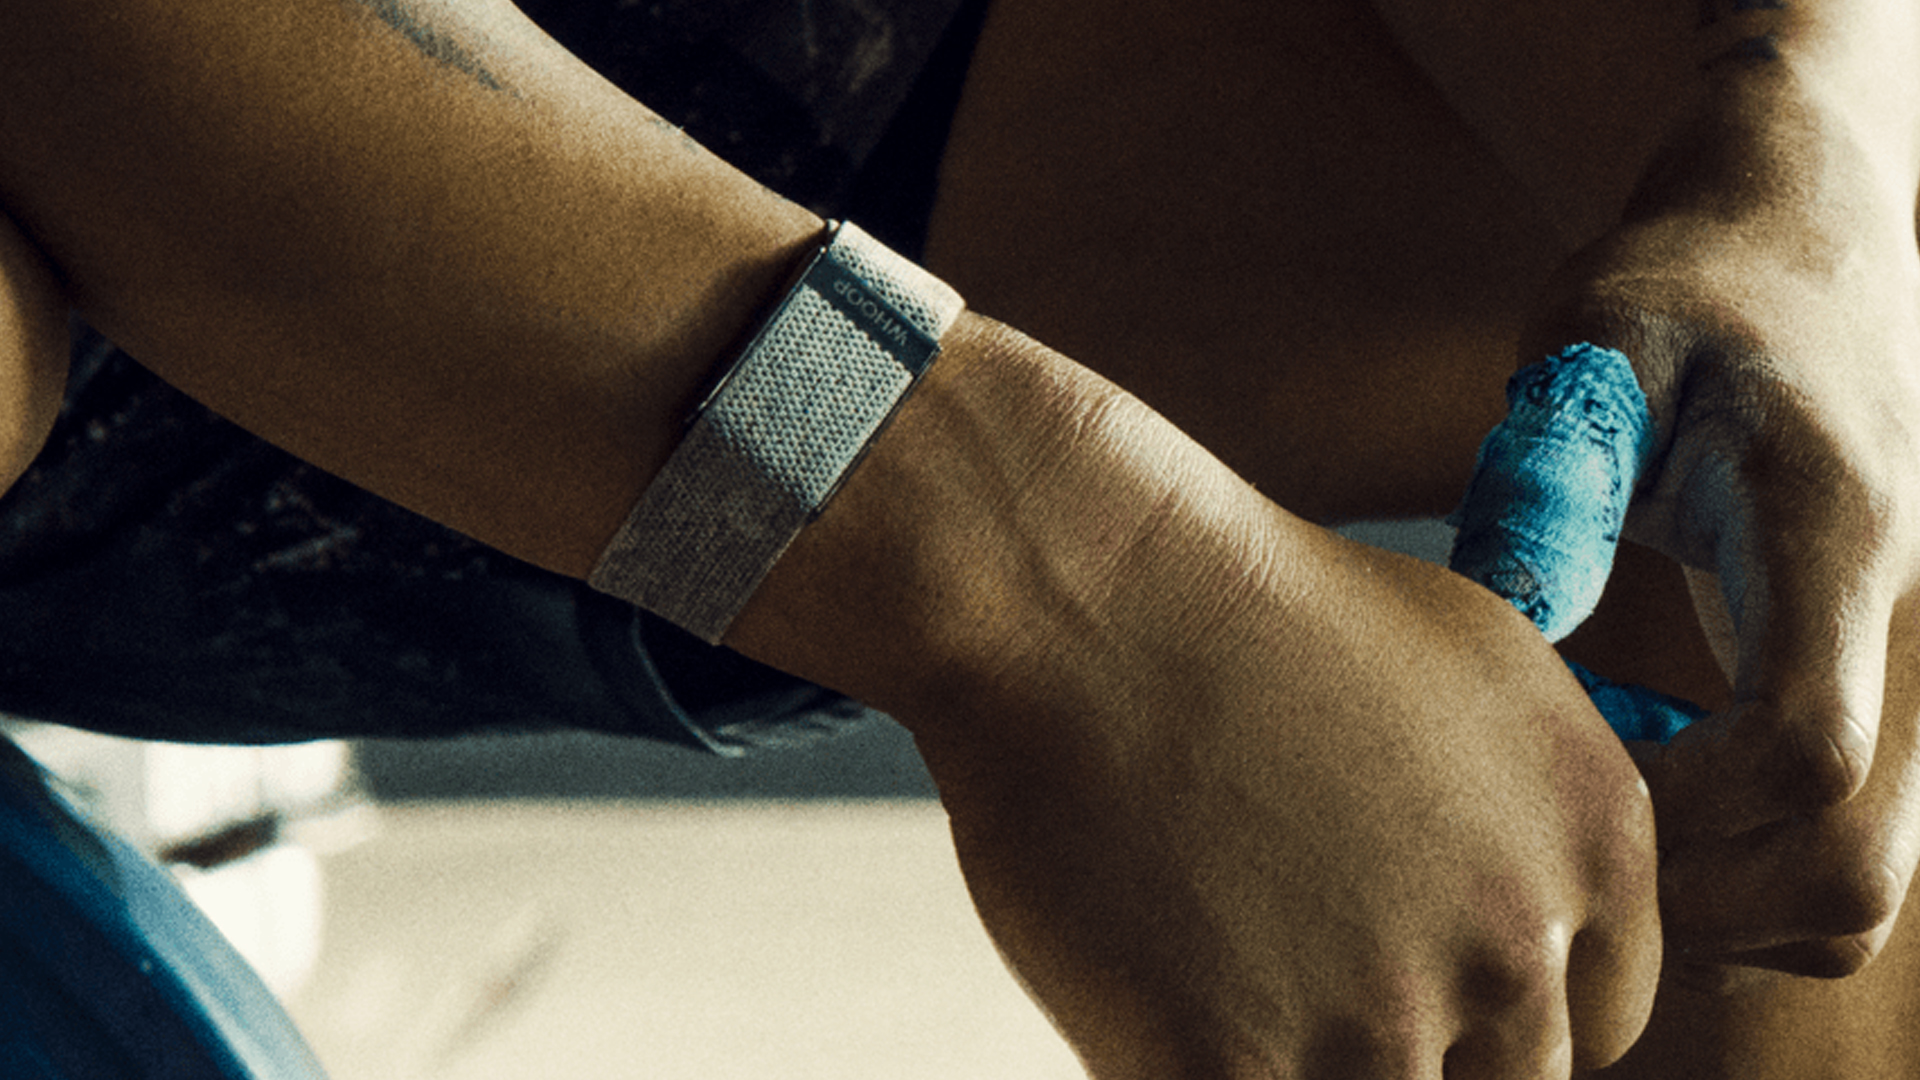 The Whoop 4.0 fitness tracker in band form.